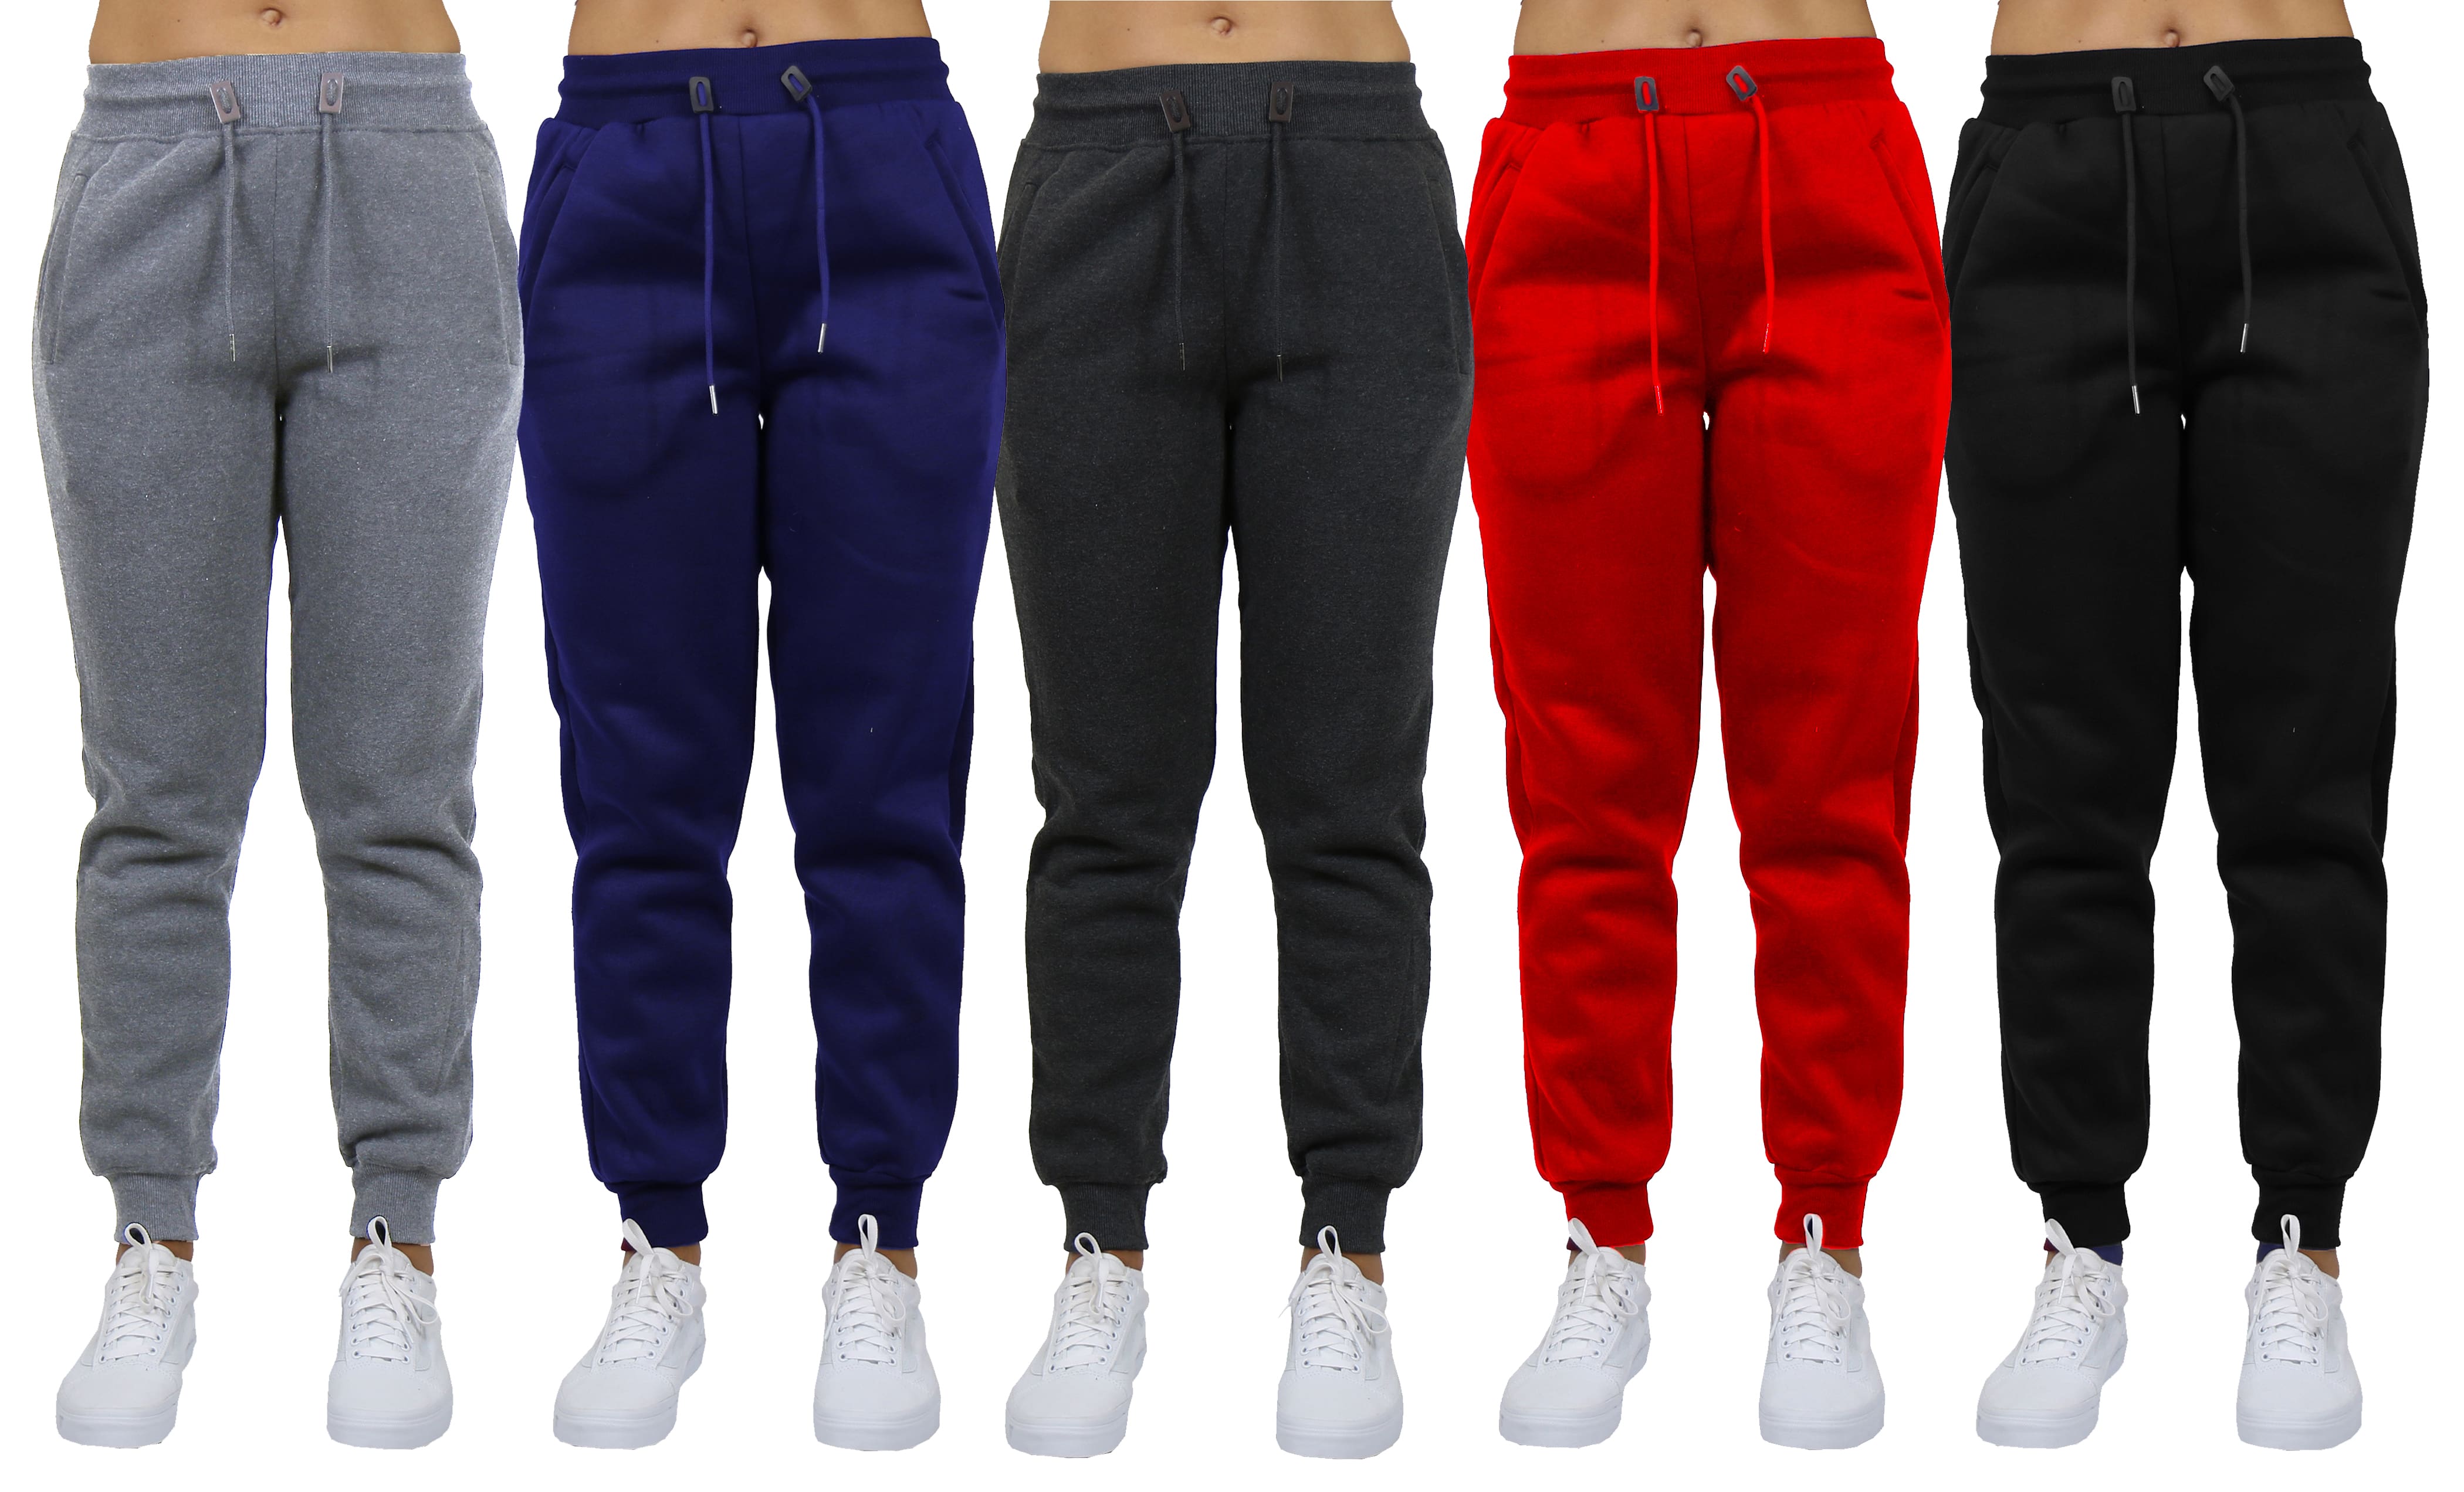 Galaxy by Harvic 3-Pack Women's Loose Fit Fleece Jogger Sweatpants